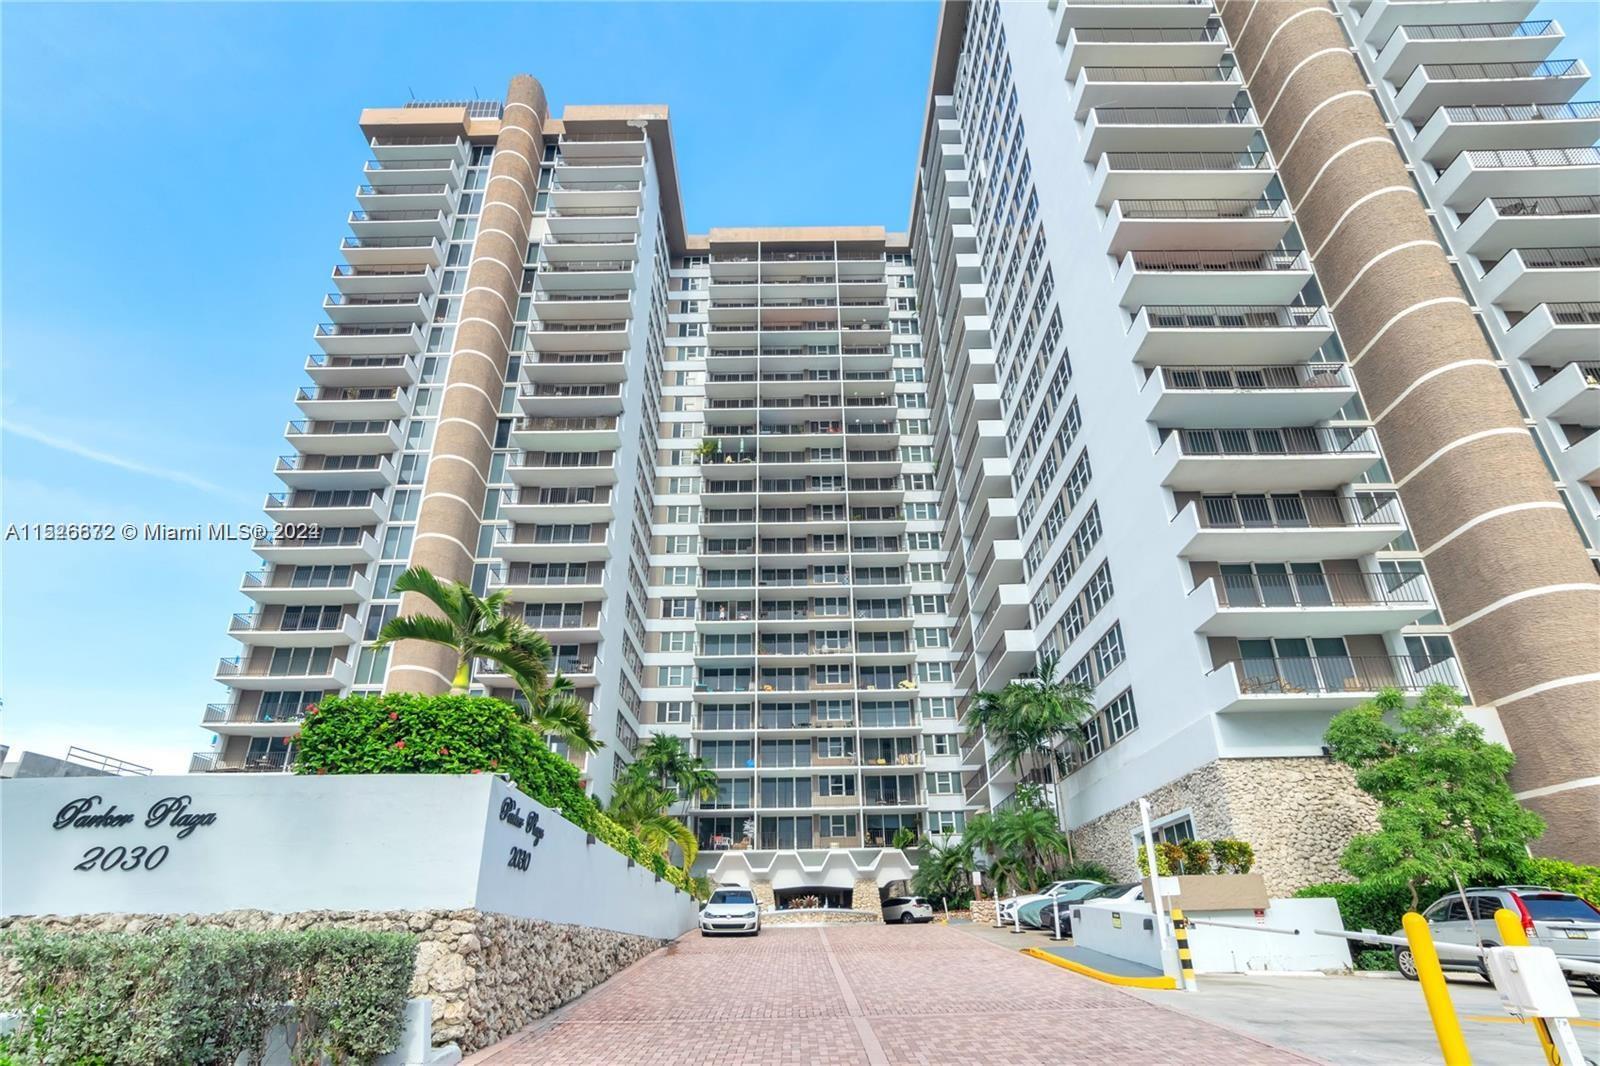 BEAUTIFUL PENTHOUSE UNIT WITH 2 BED AND 2 BATHS AT AN OCEANFRONT BUILDING WITH INTRACOASTAL AND CITY